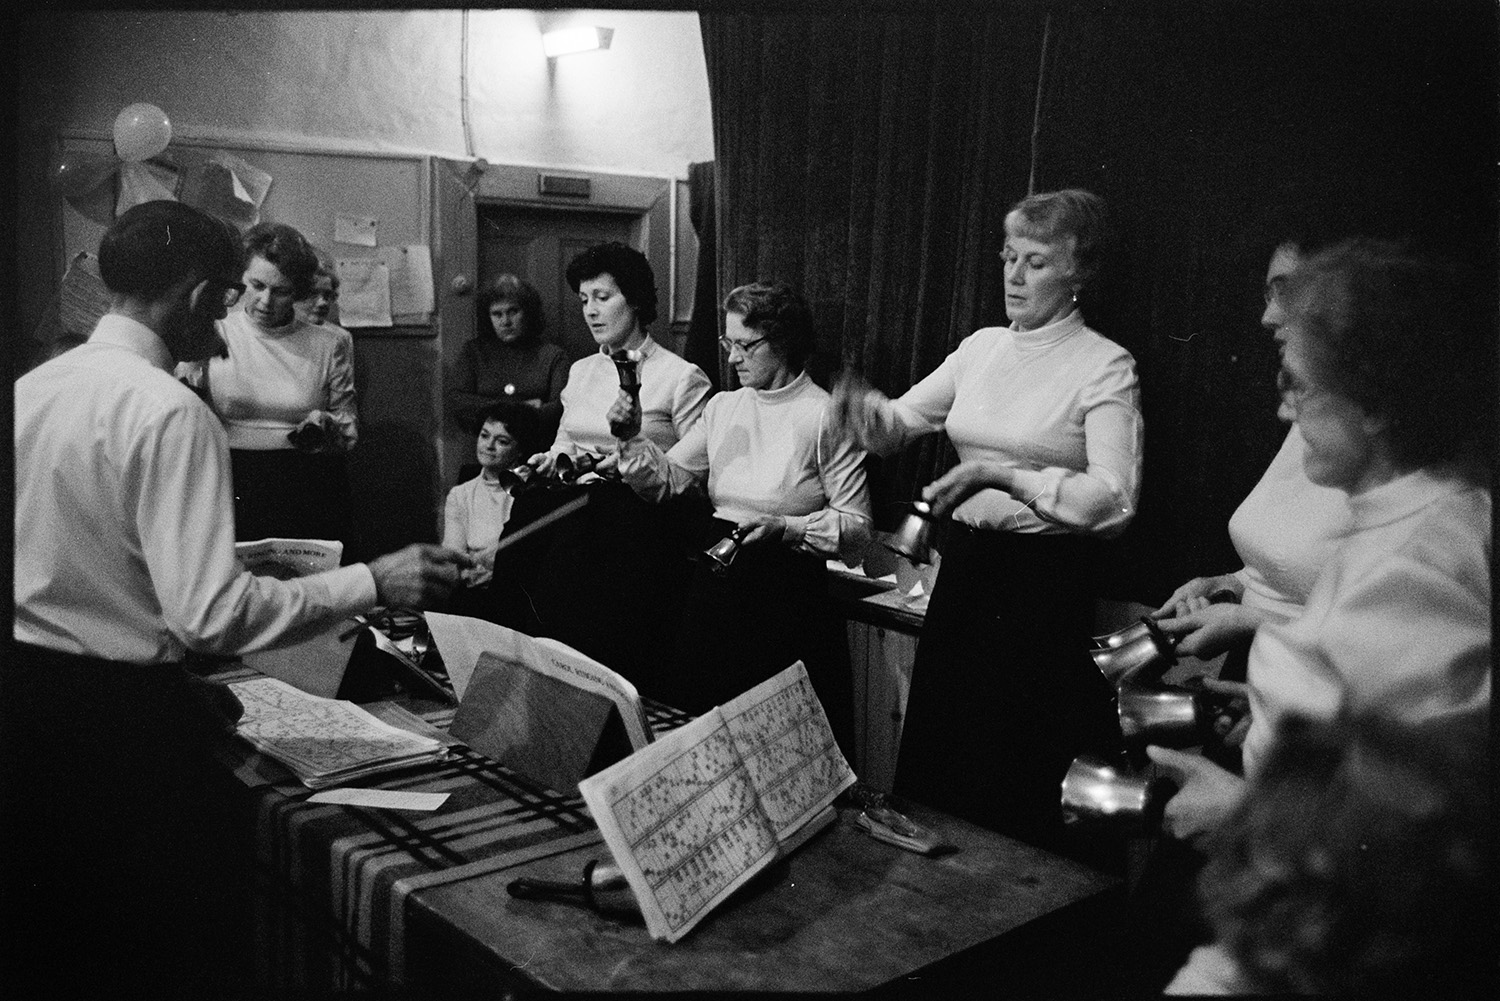 Christmas Show in village hall Hand bell ringers.
[Group of women in the Ashreigney Hand bell Ringers performing at the Christmas Show in Merton Village Hall, being conducted by a man.]